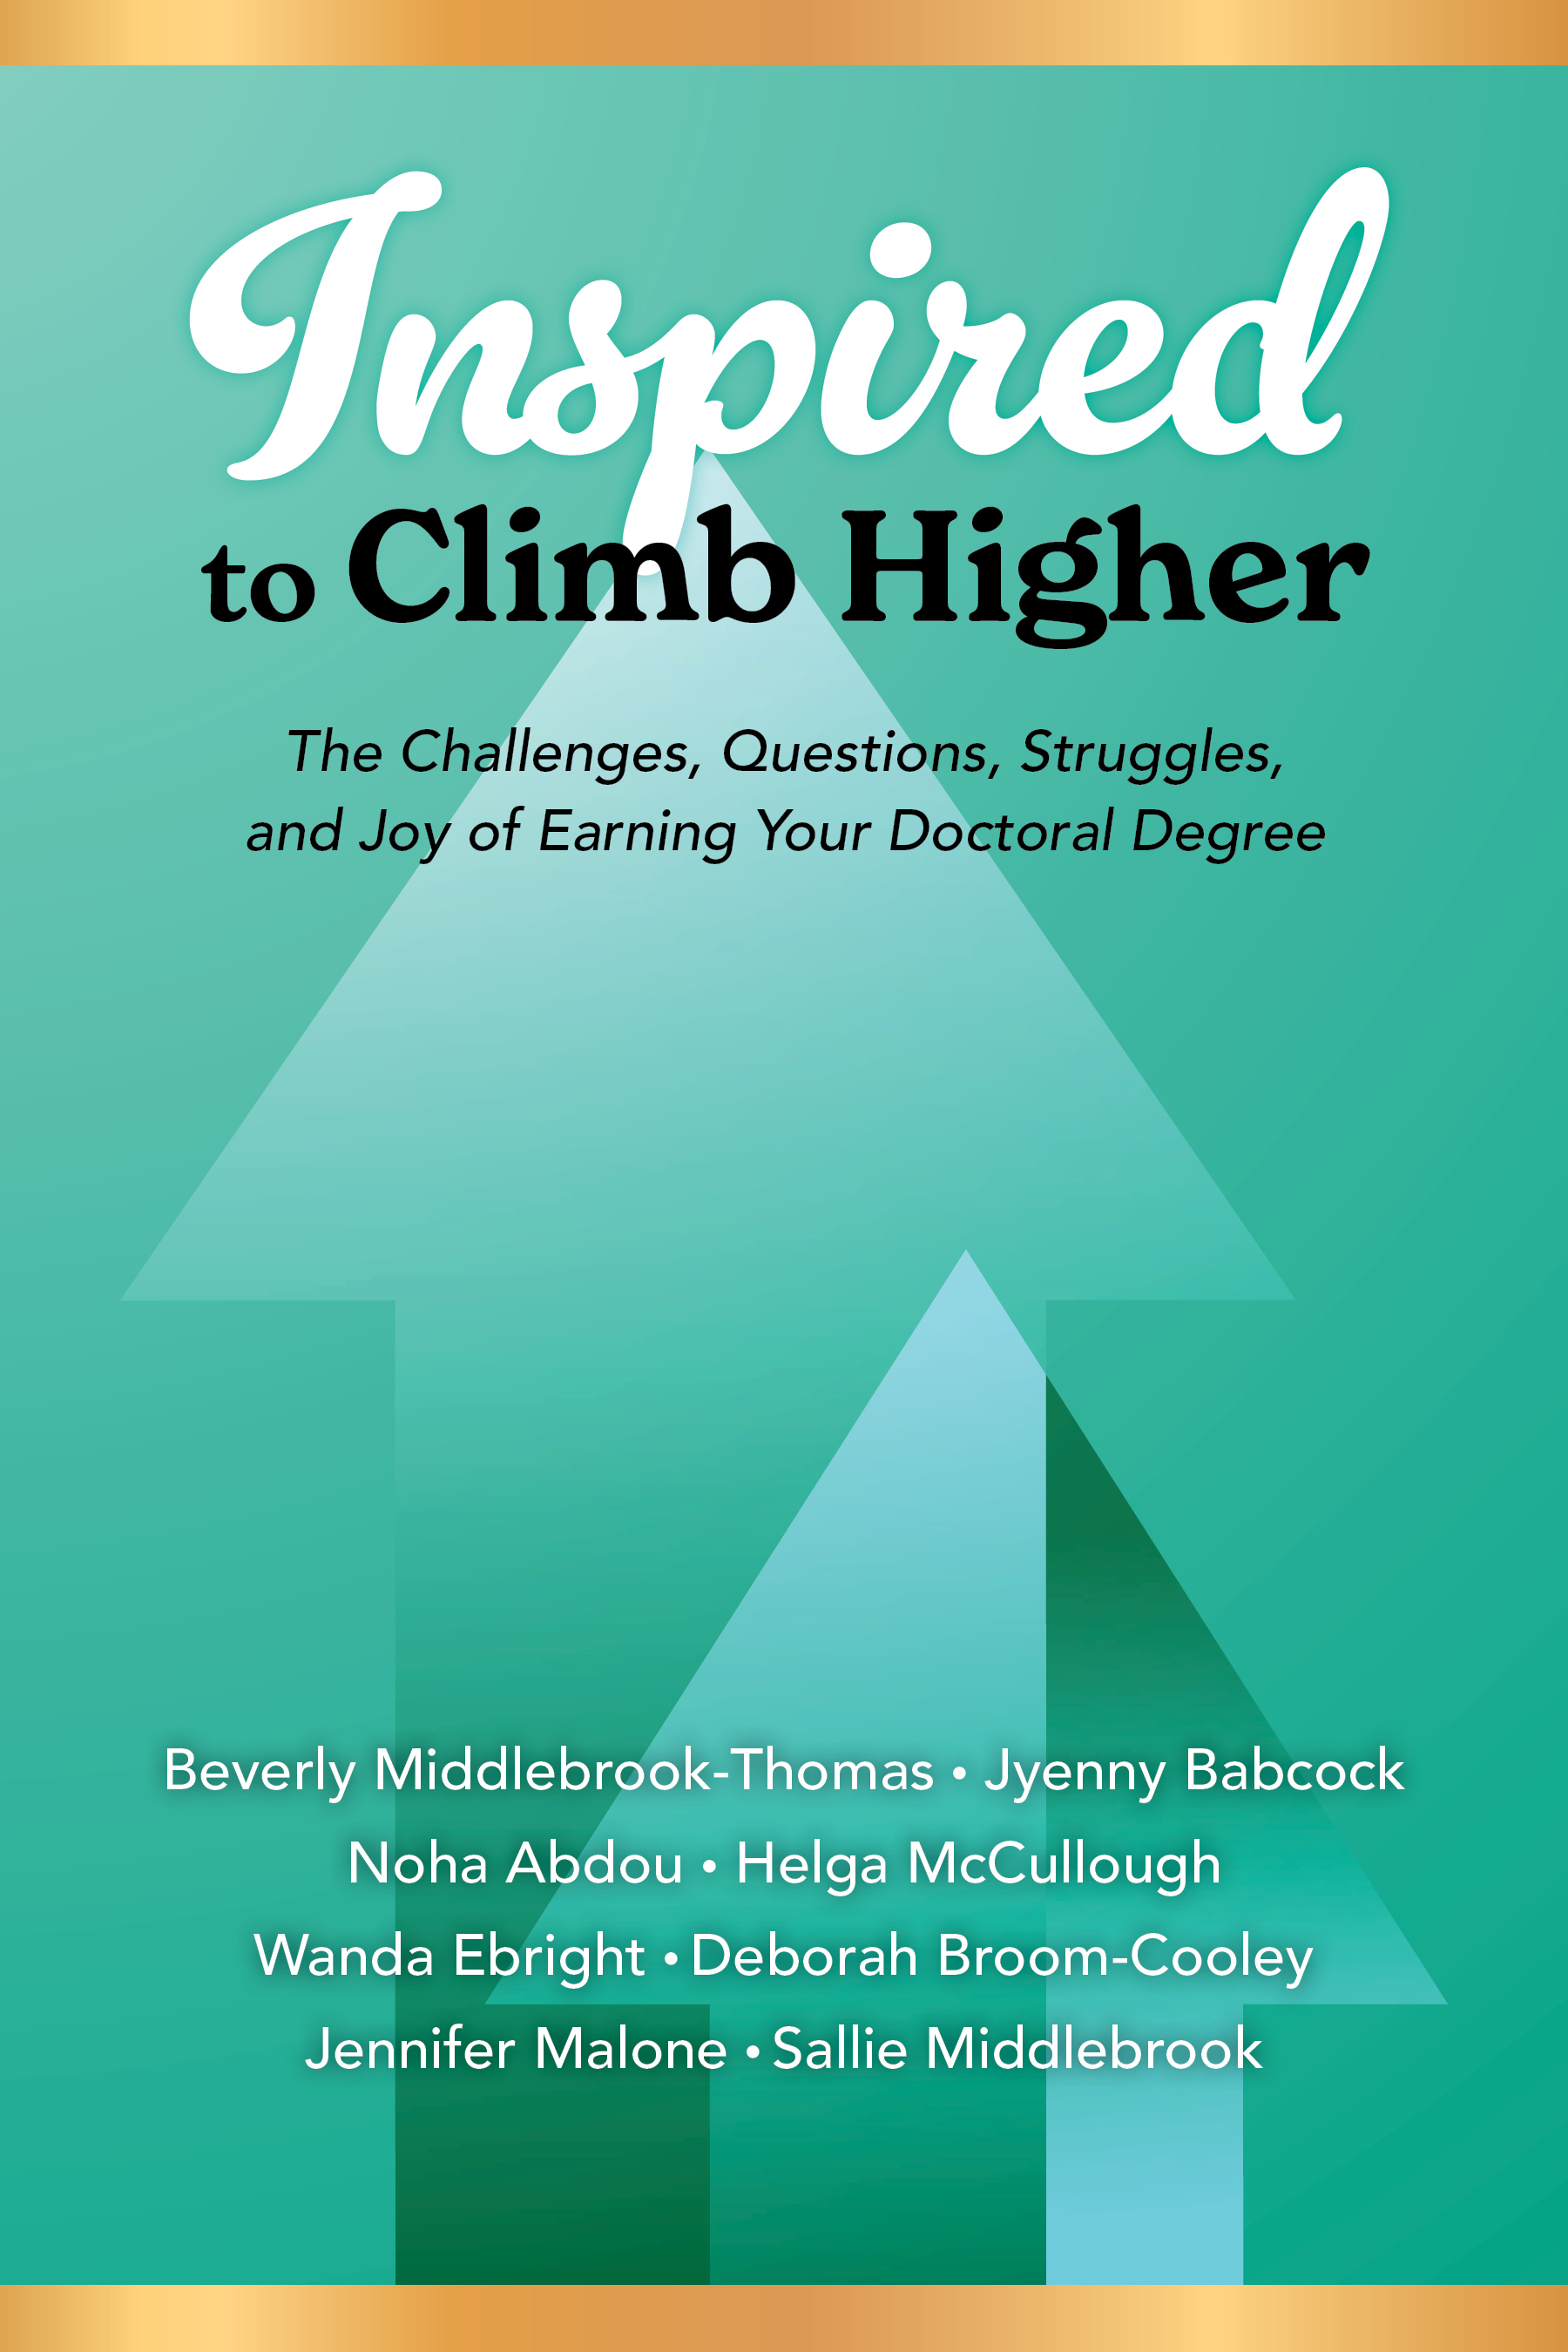 Inspired to Climb Higher: The Challenges, Questions, Struggles, and Joy of Earning Your Doctoral Degree